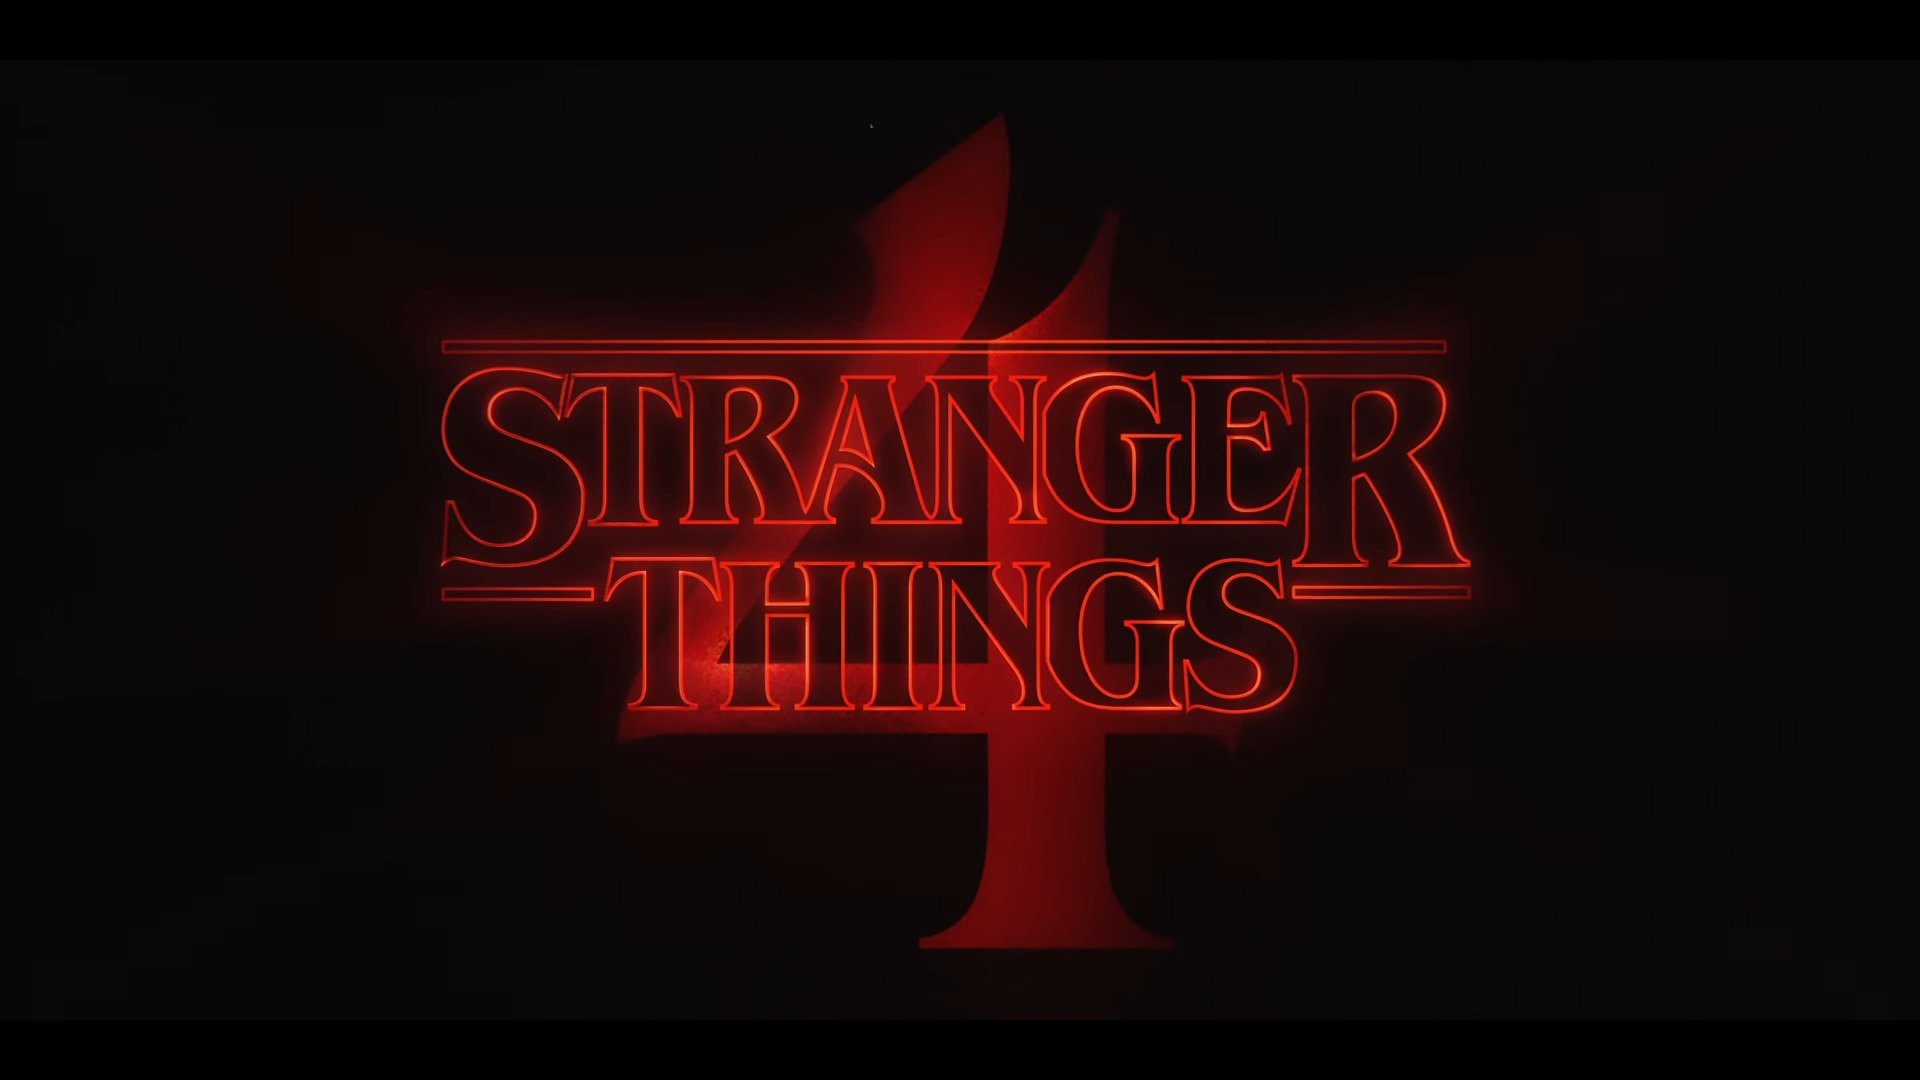 Stranger Things season 4: trailer, release date and what to expect